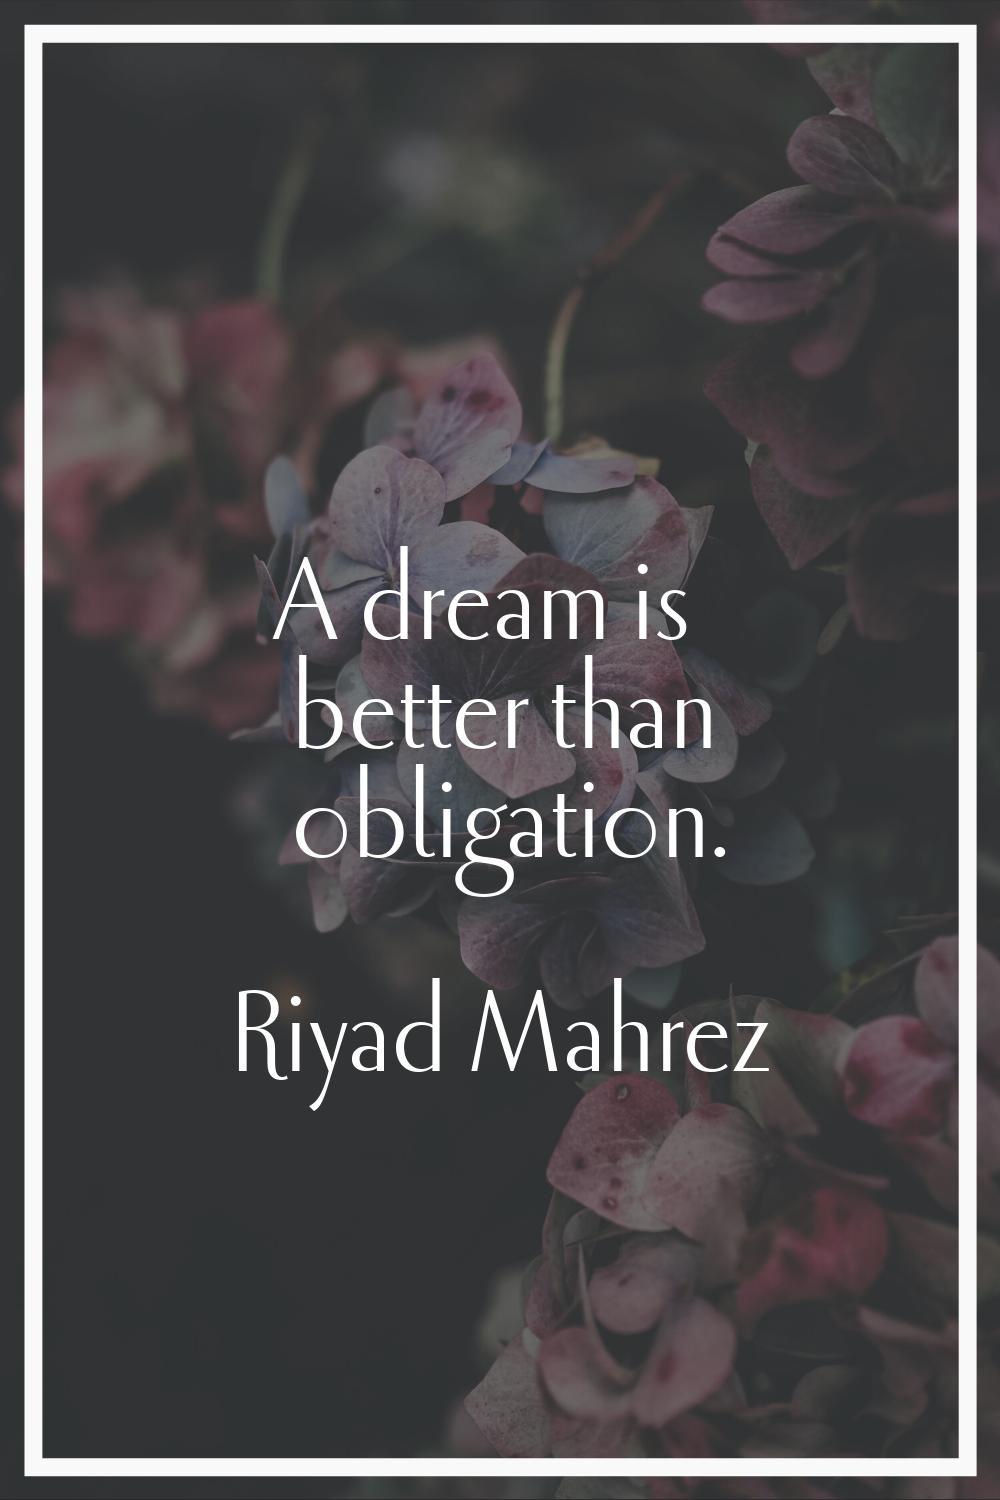 A dream is better than obligation.